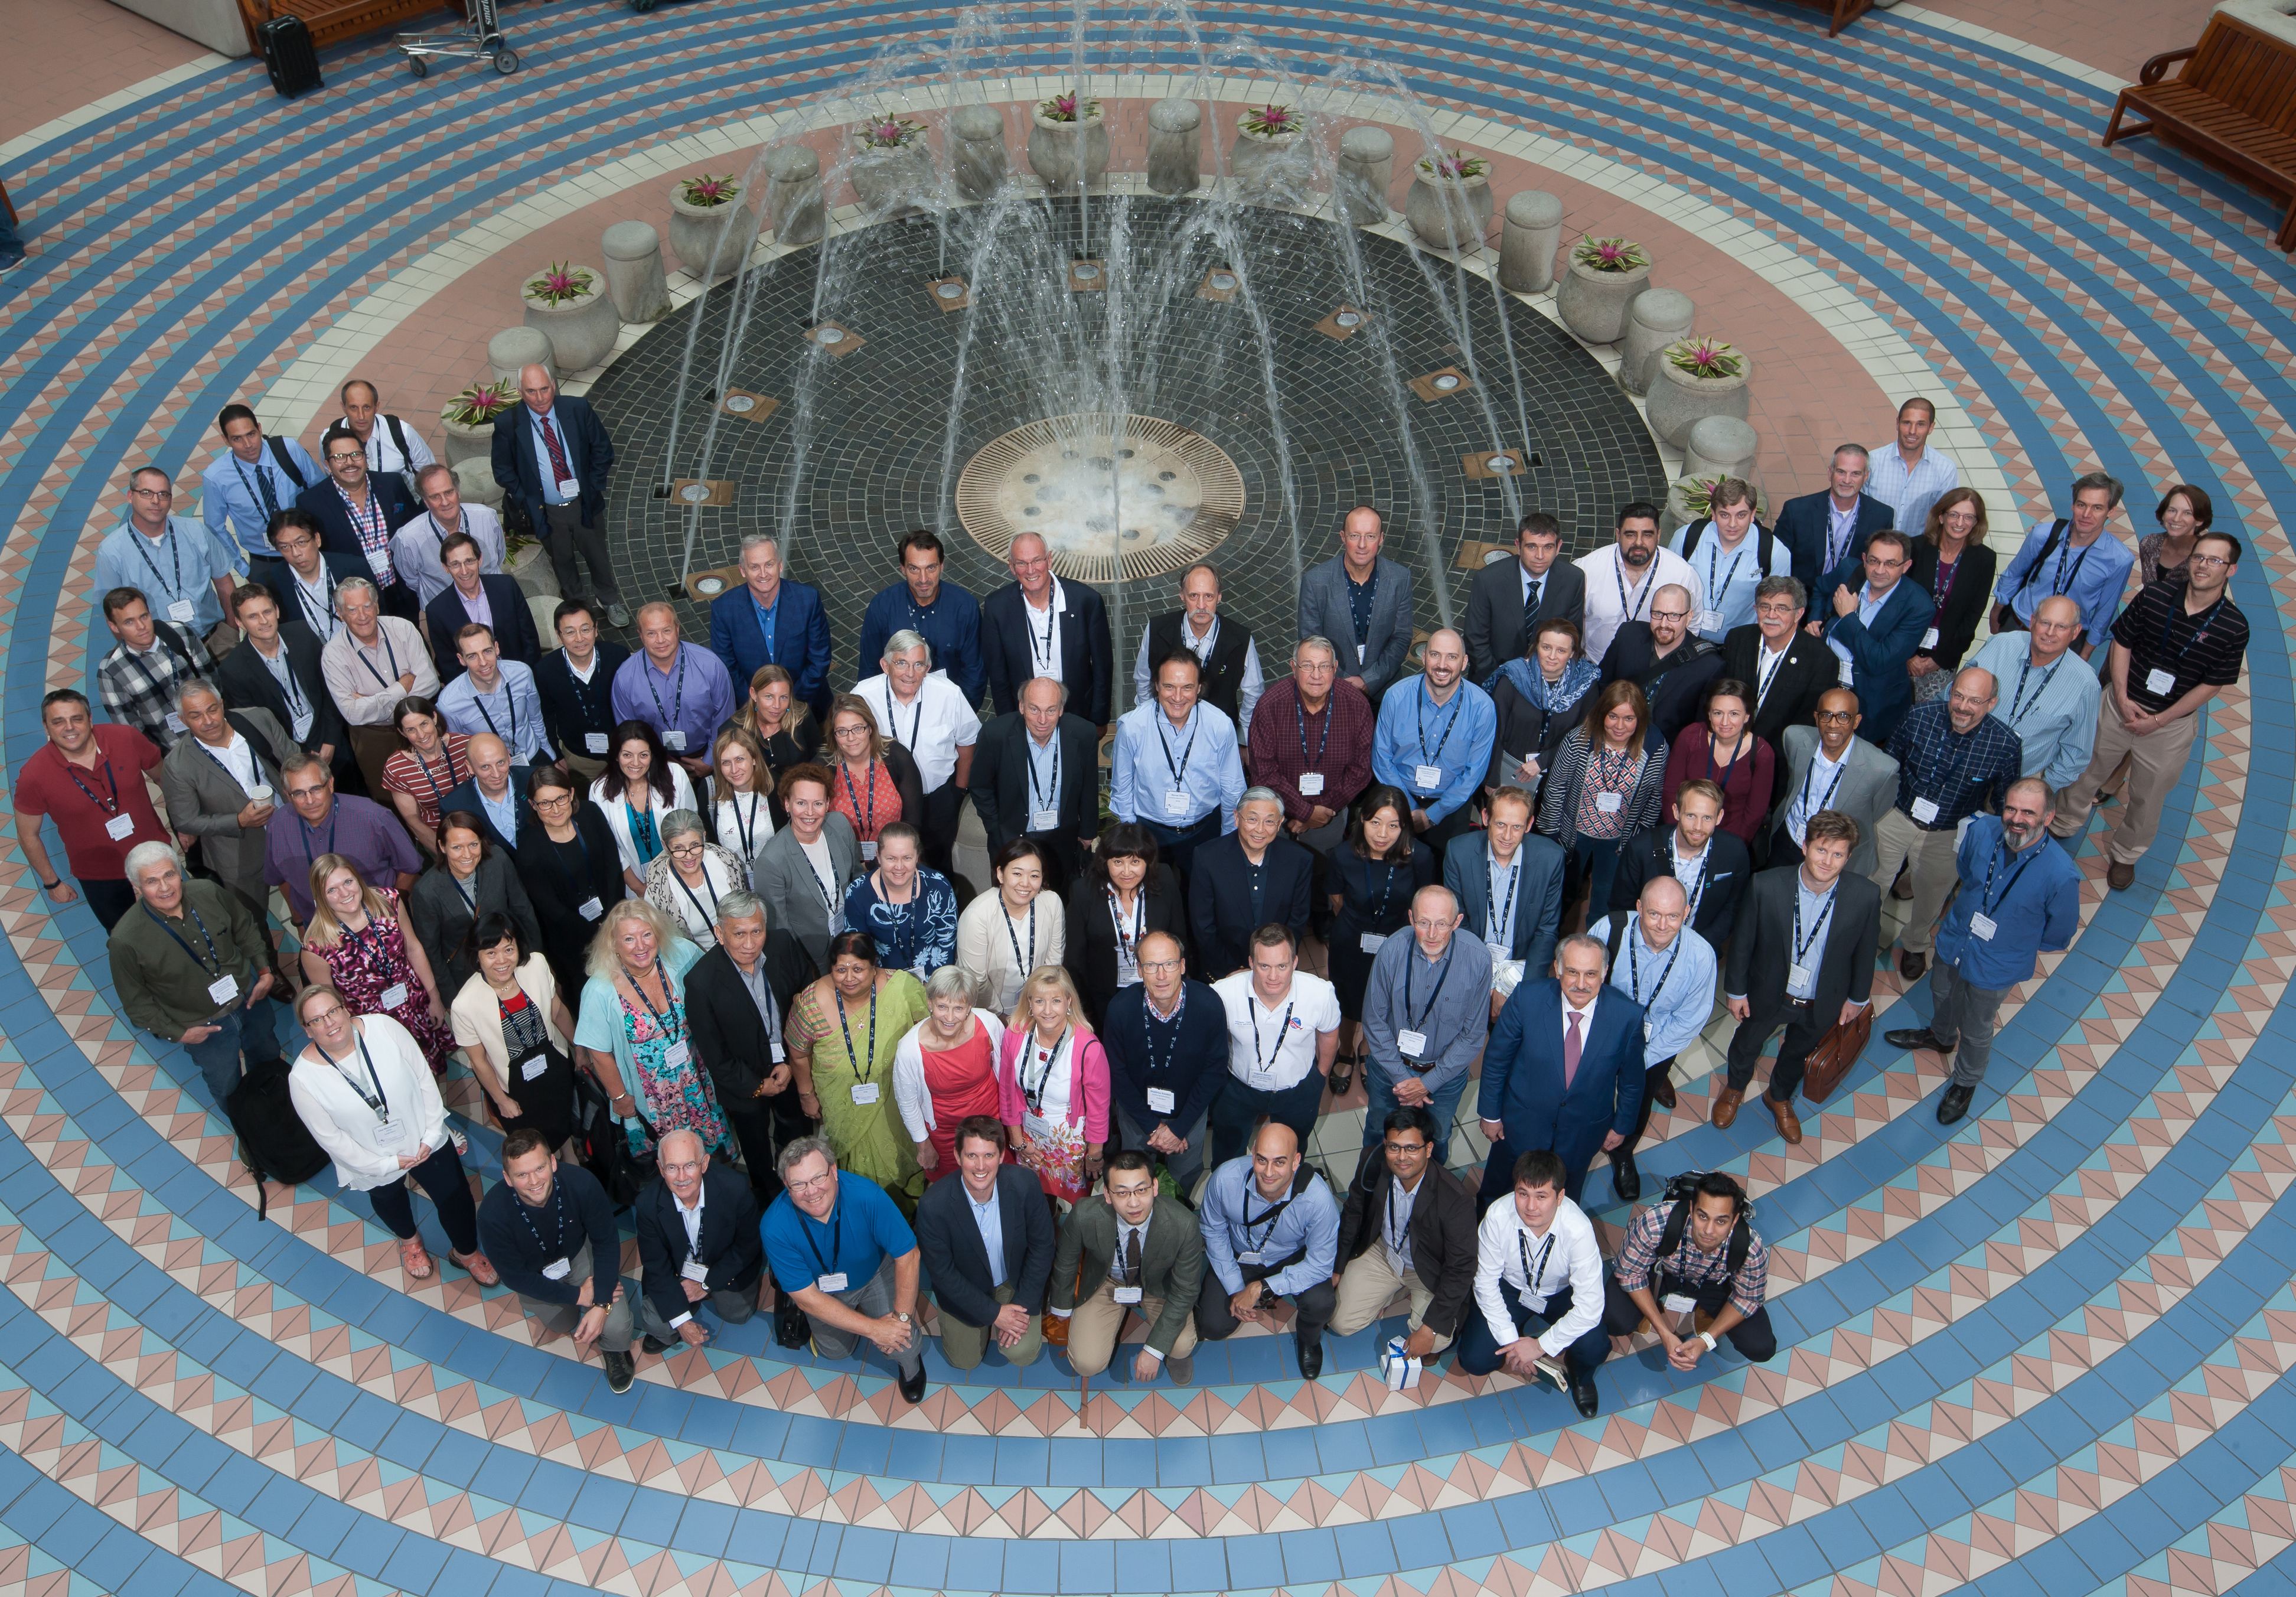 2017 Science Symposium attendees photo